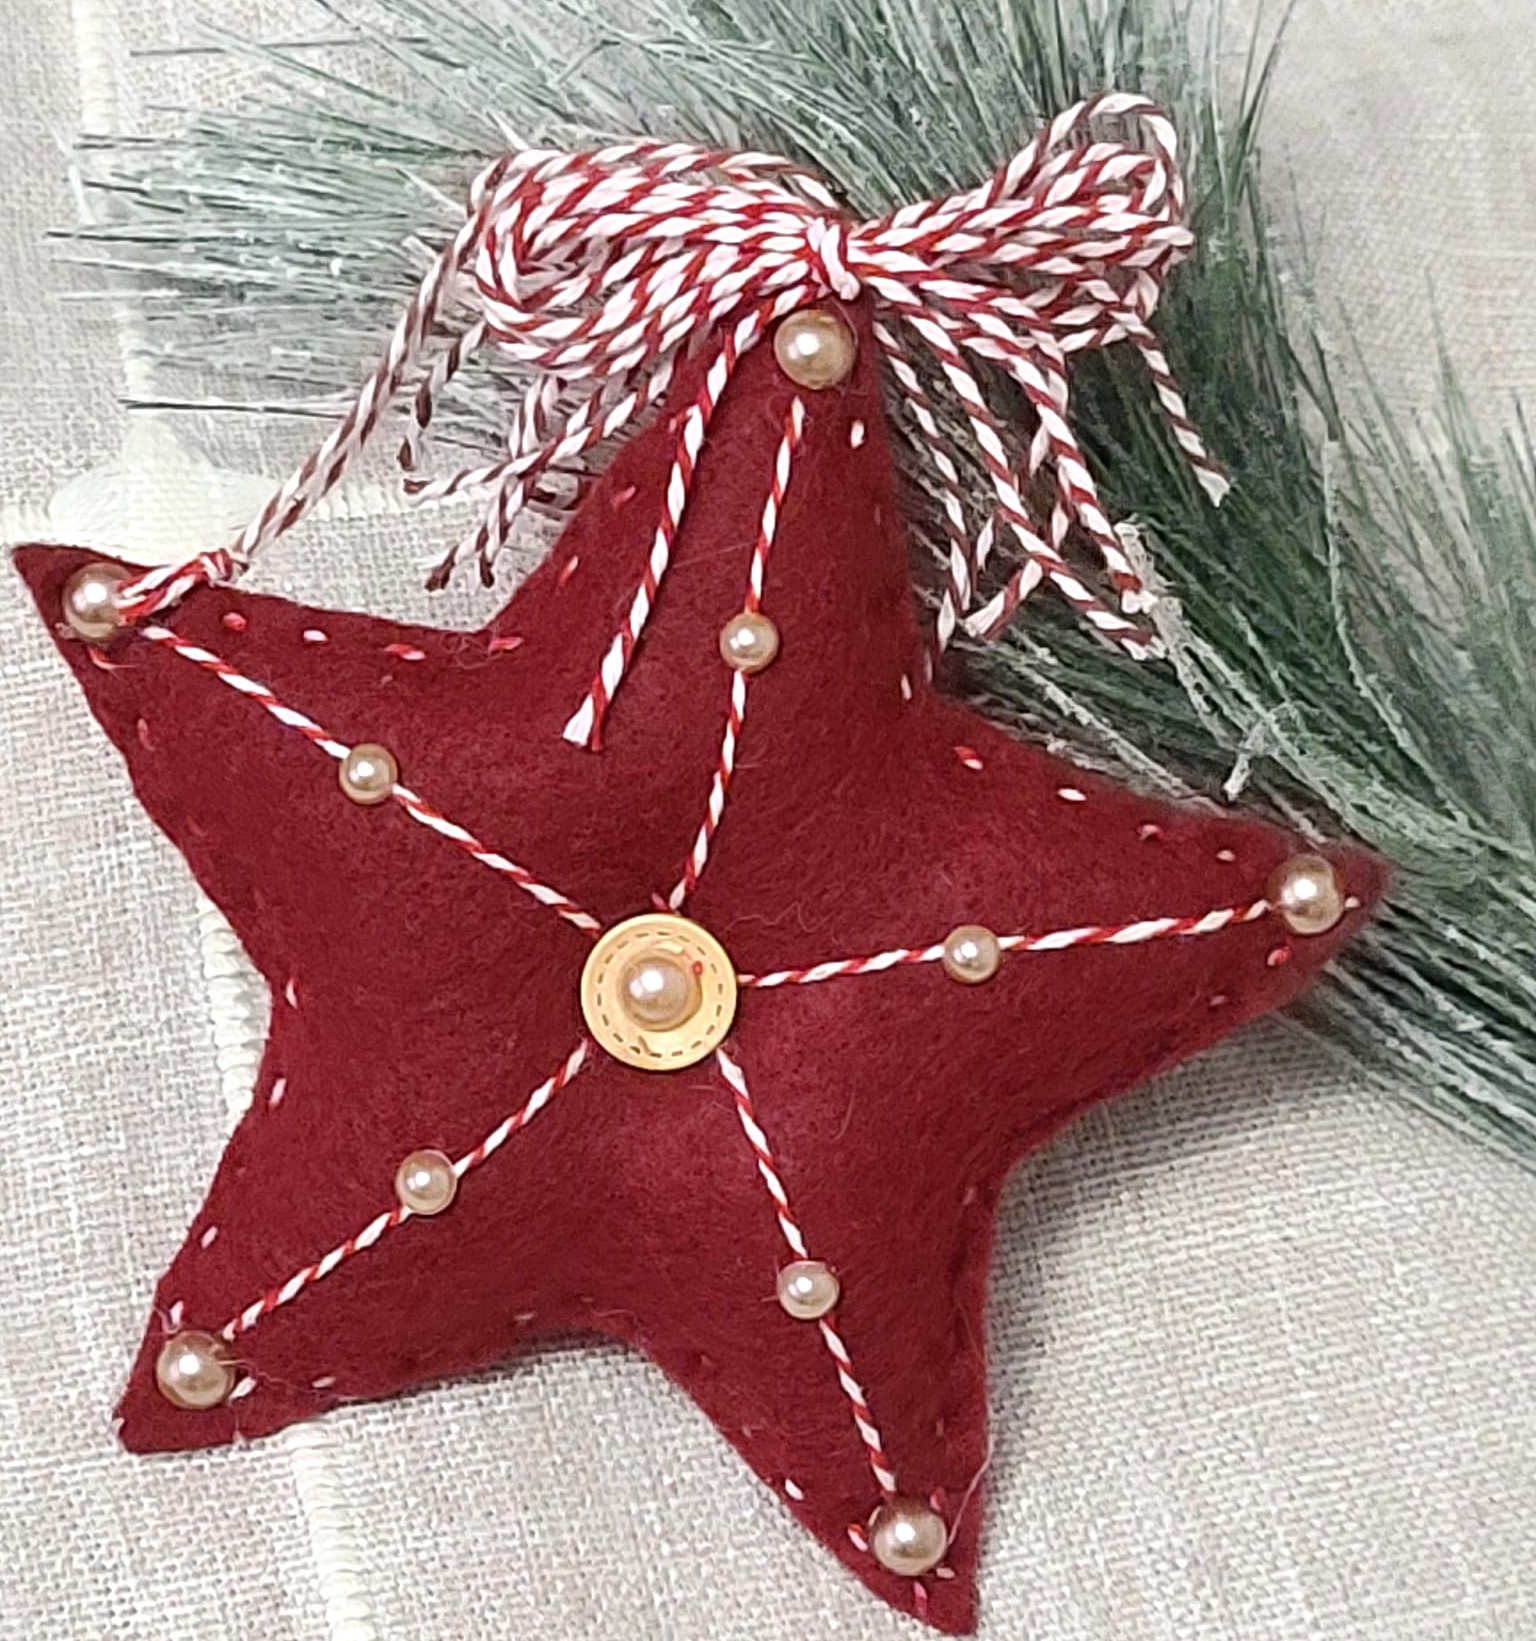 Burgundy Red Stars 2-sided 4 3/4" x 4 3/4" Star Ornament - Click Image to Close